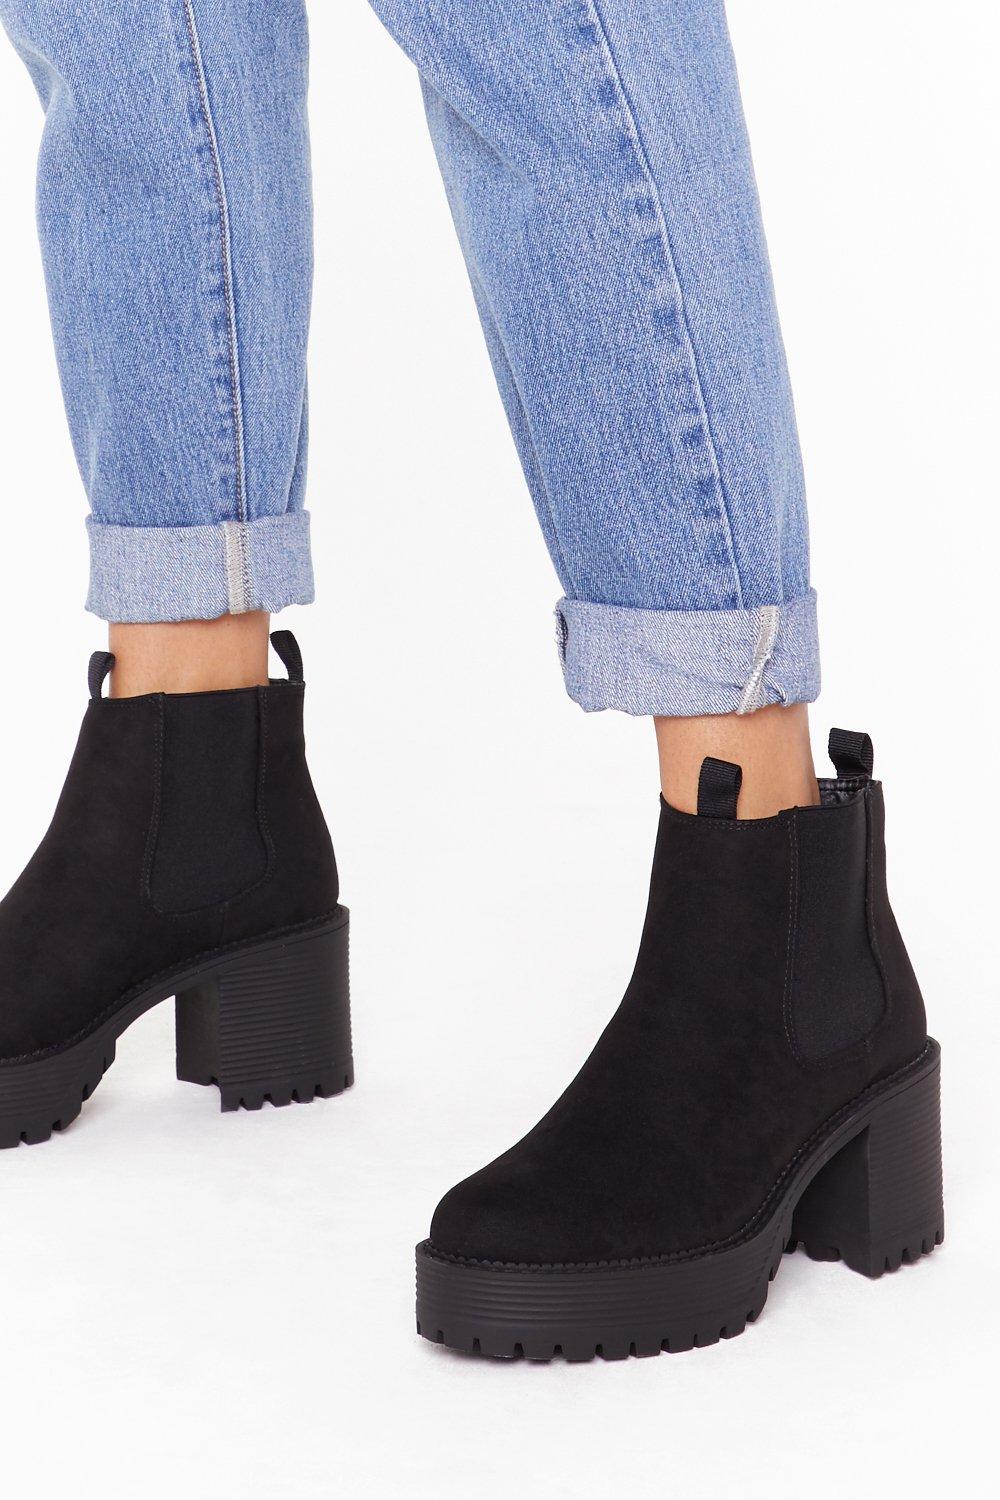 We Suede It Faux Suede Chelsea Boots 